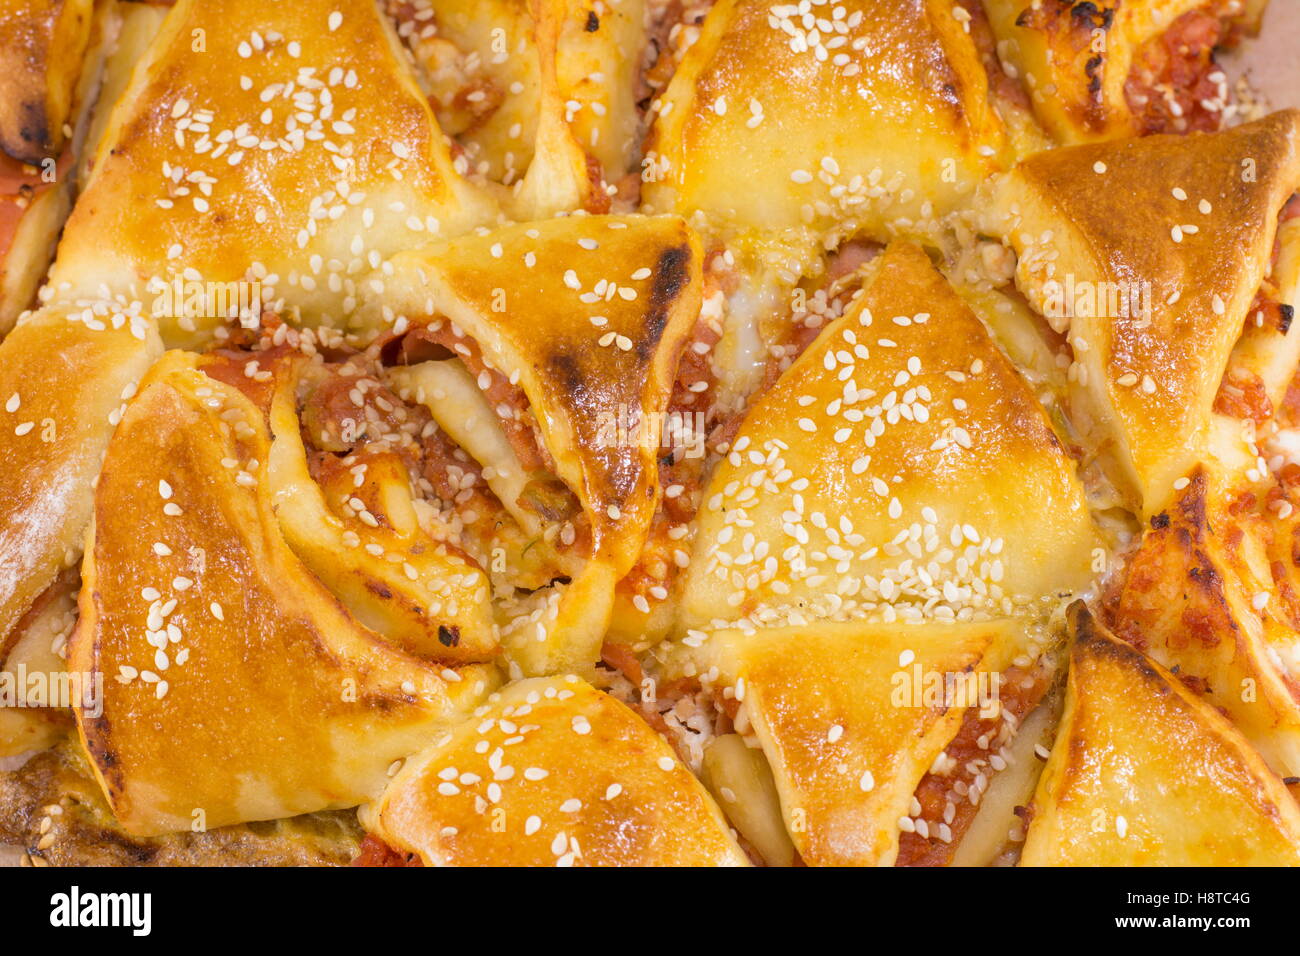 homamade triangle shaped pizza pastry close up Stock Photo